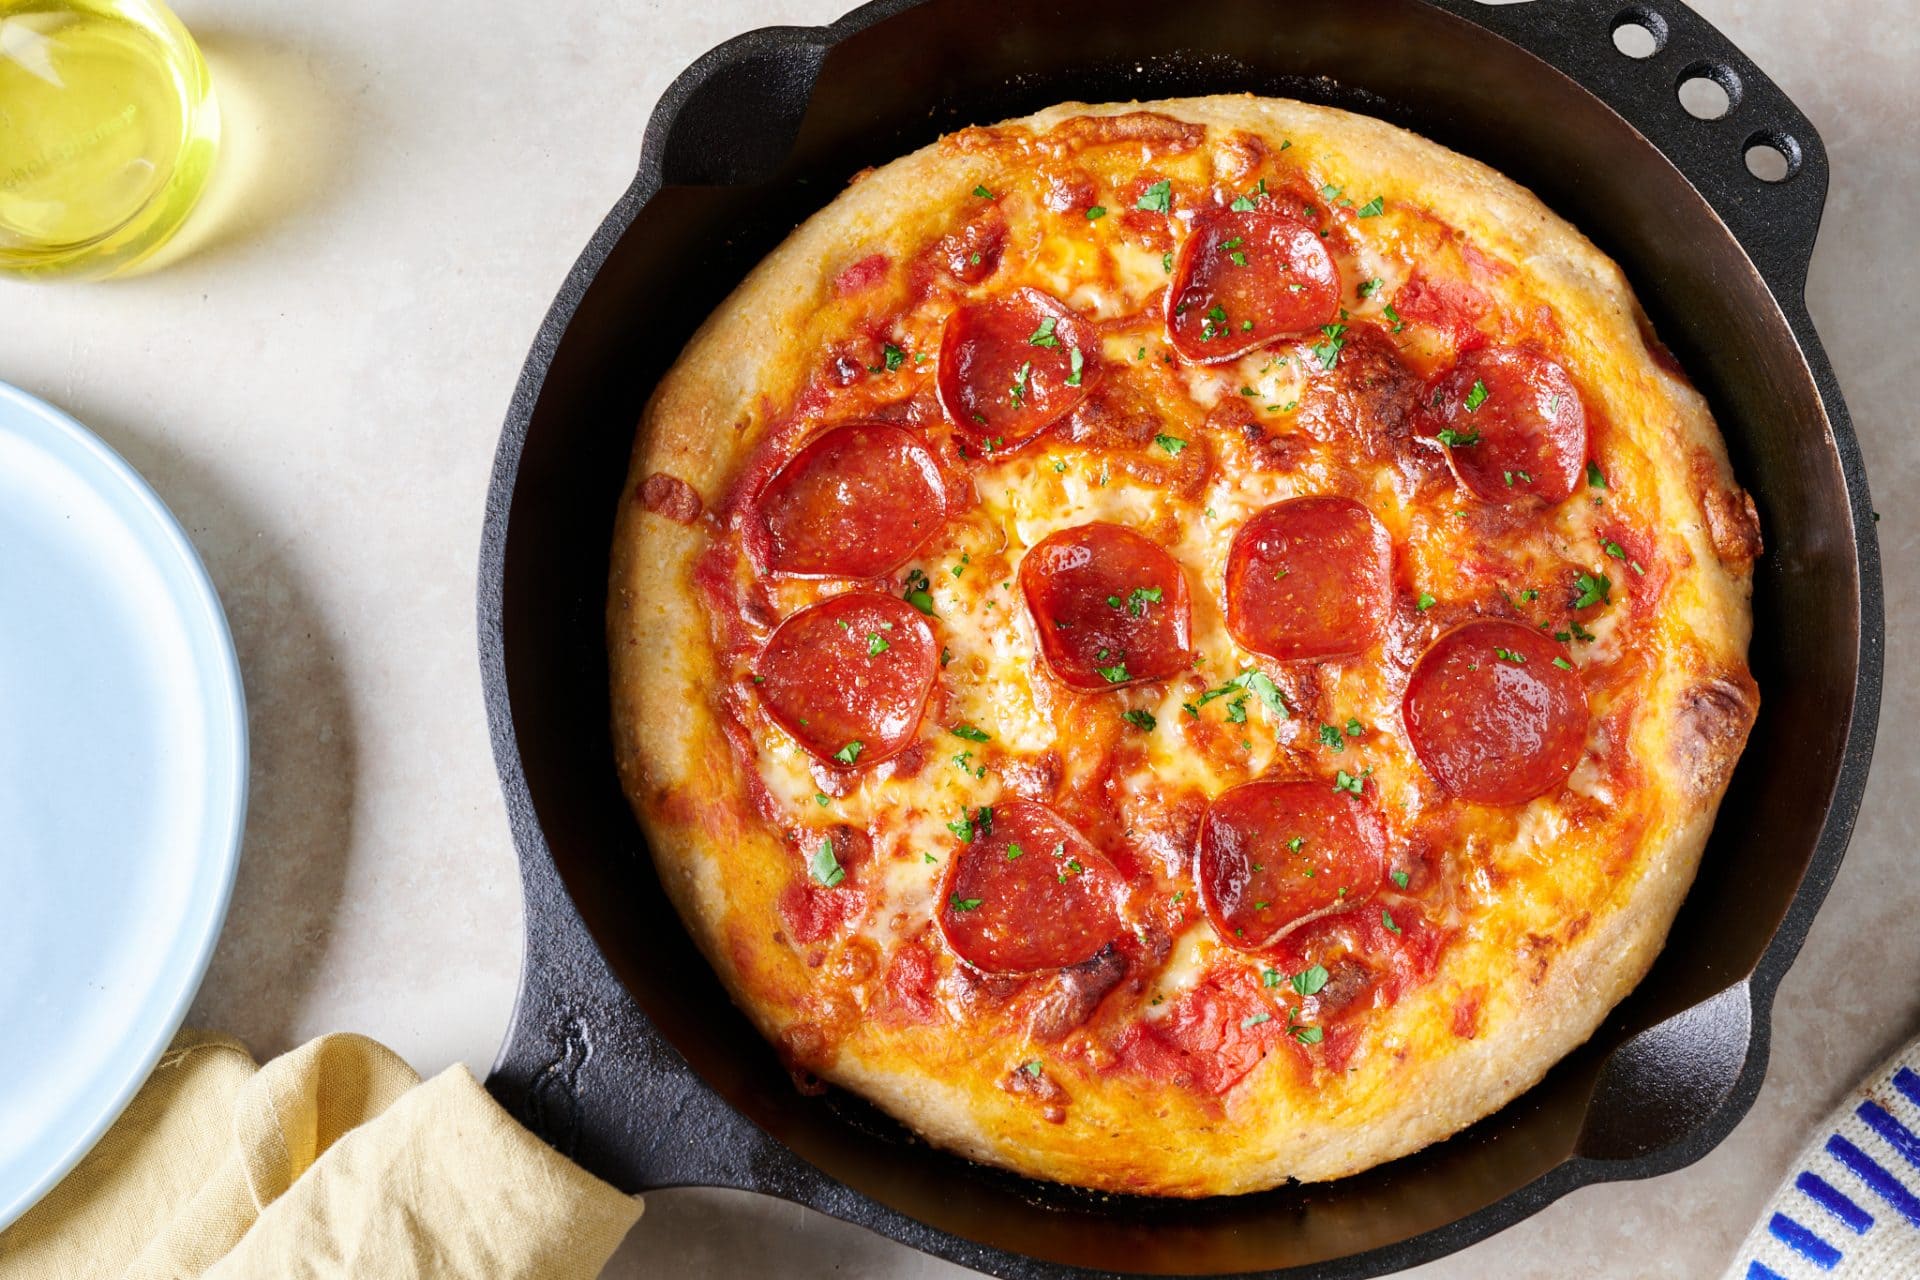 Cornmeal skillet sourdough pizza with pepperoni.